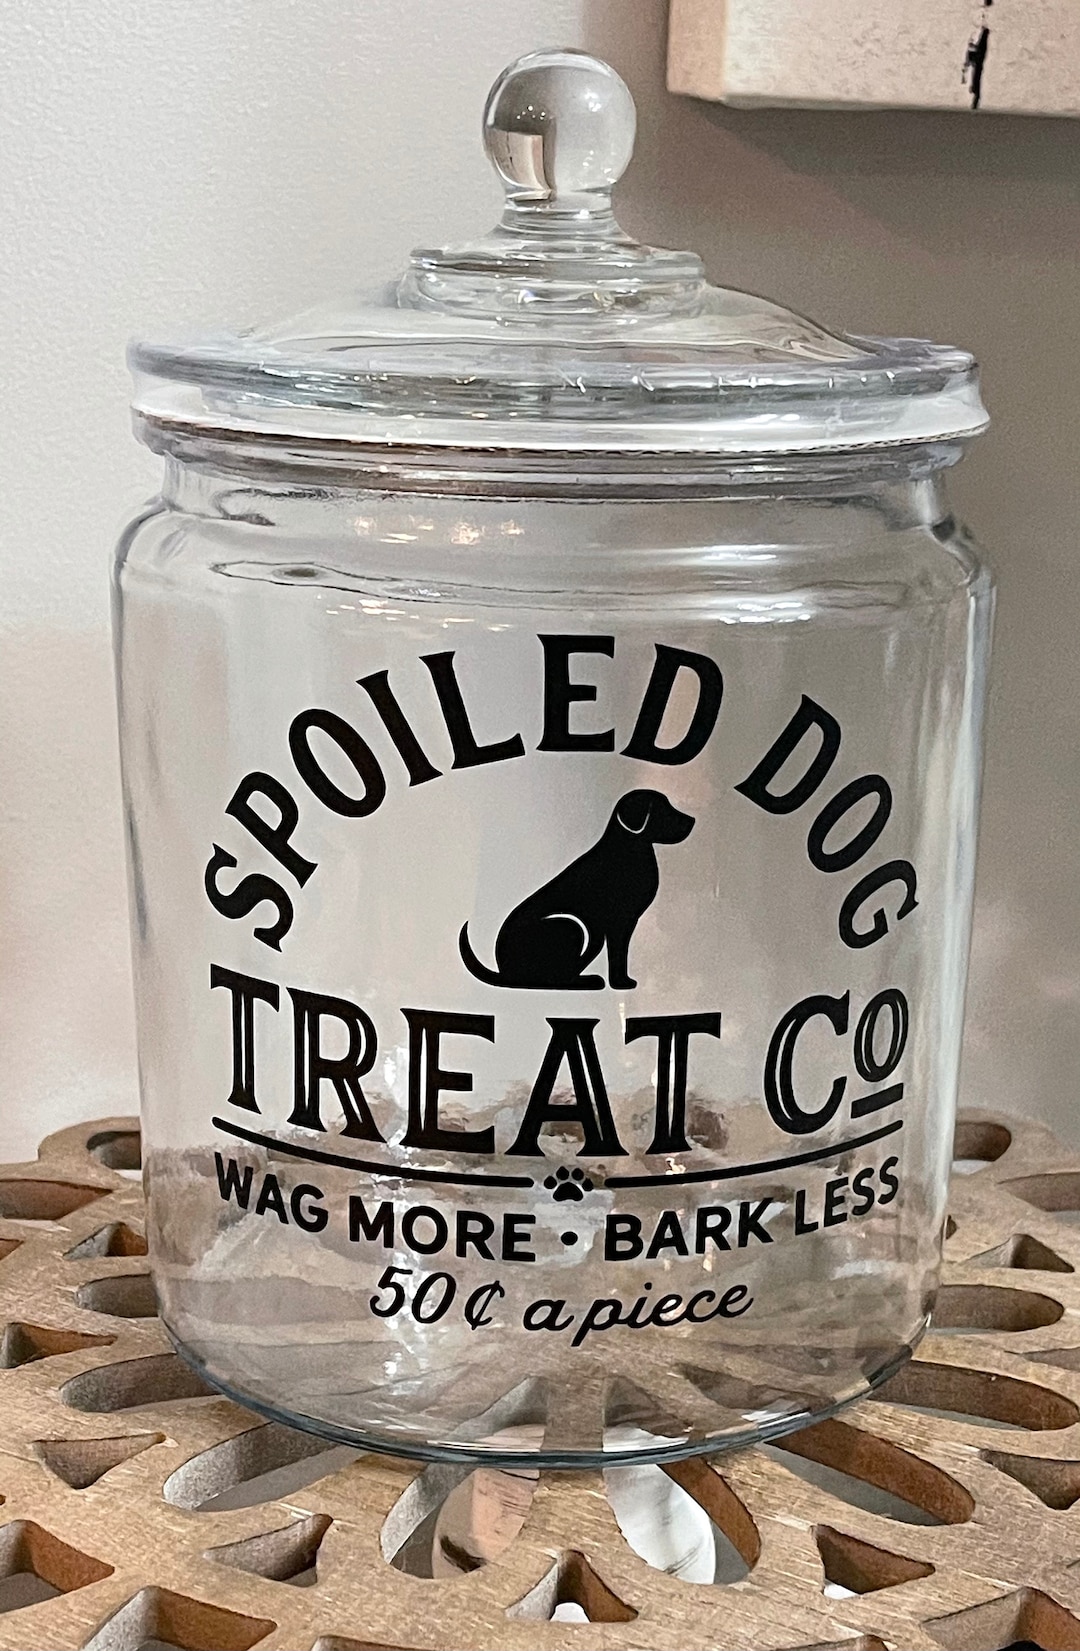 Dog Treat Holder DIY  Organize treats and leashes in an adorable way!